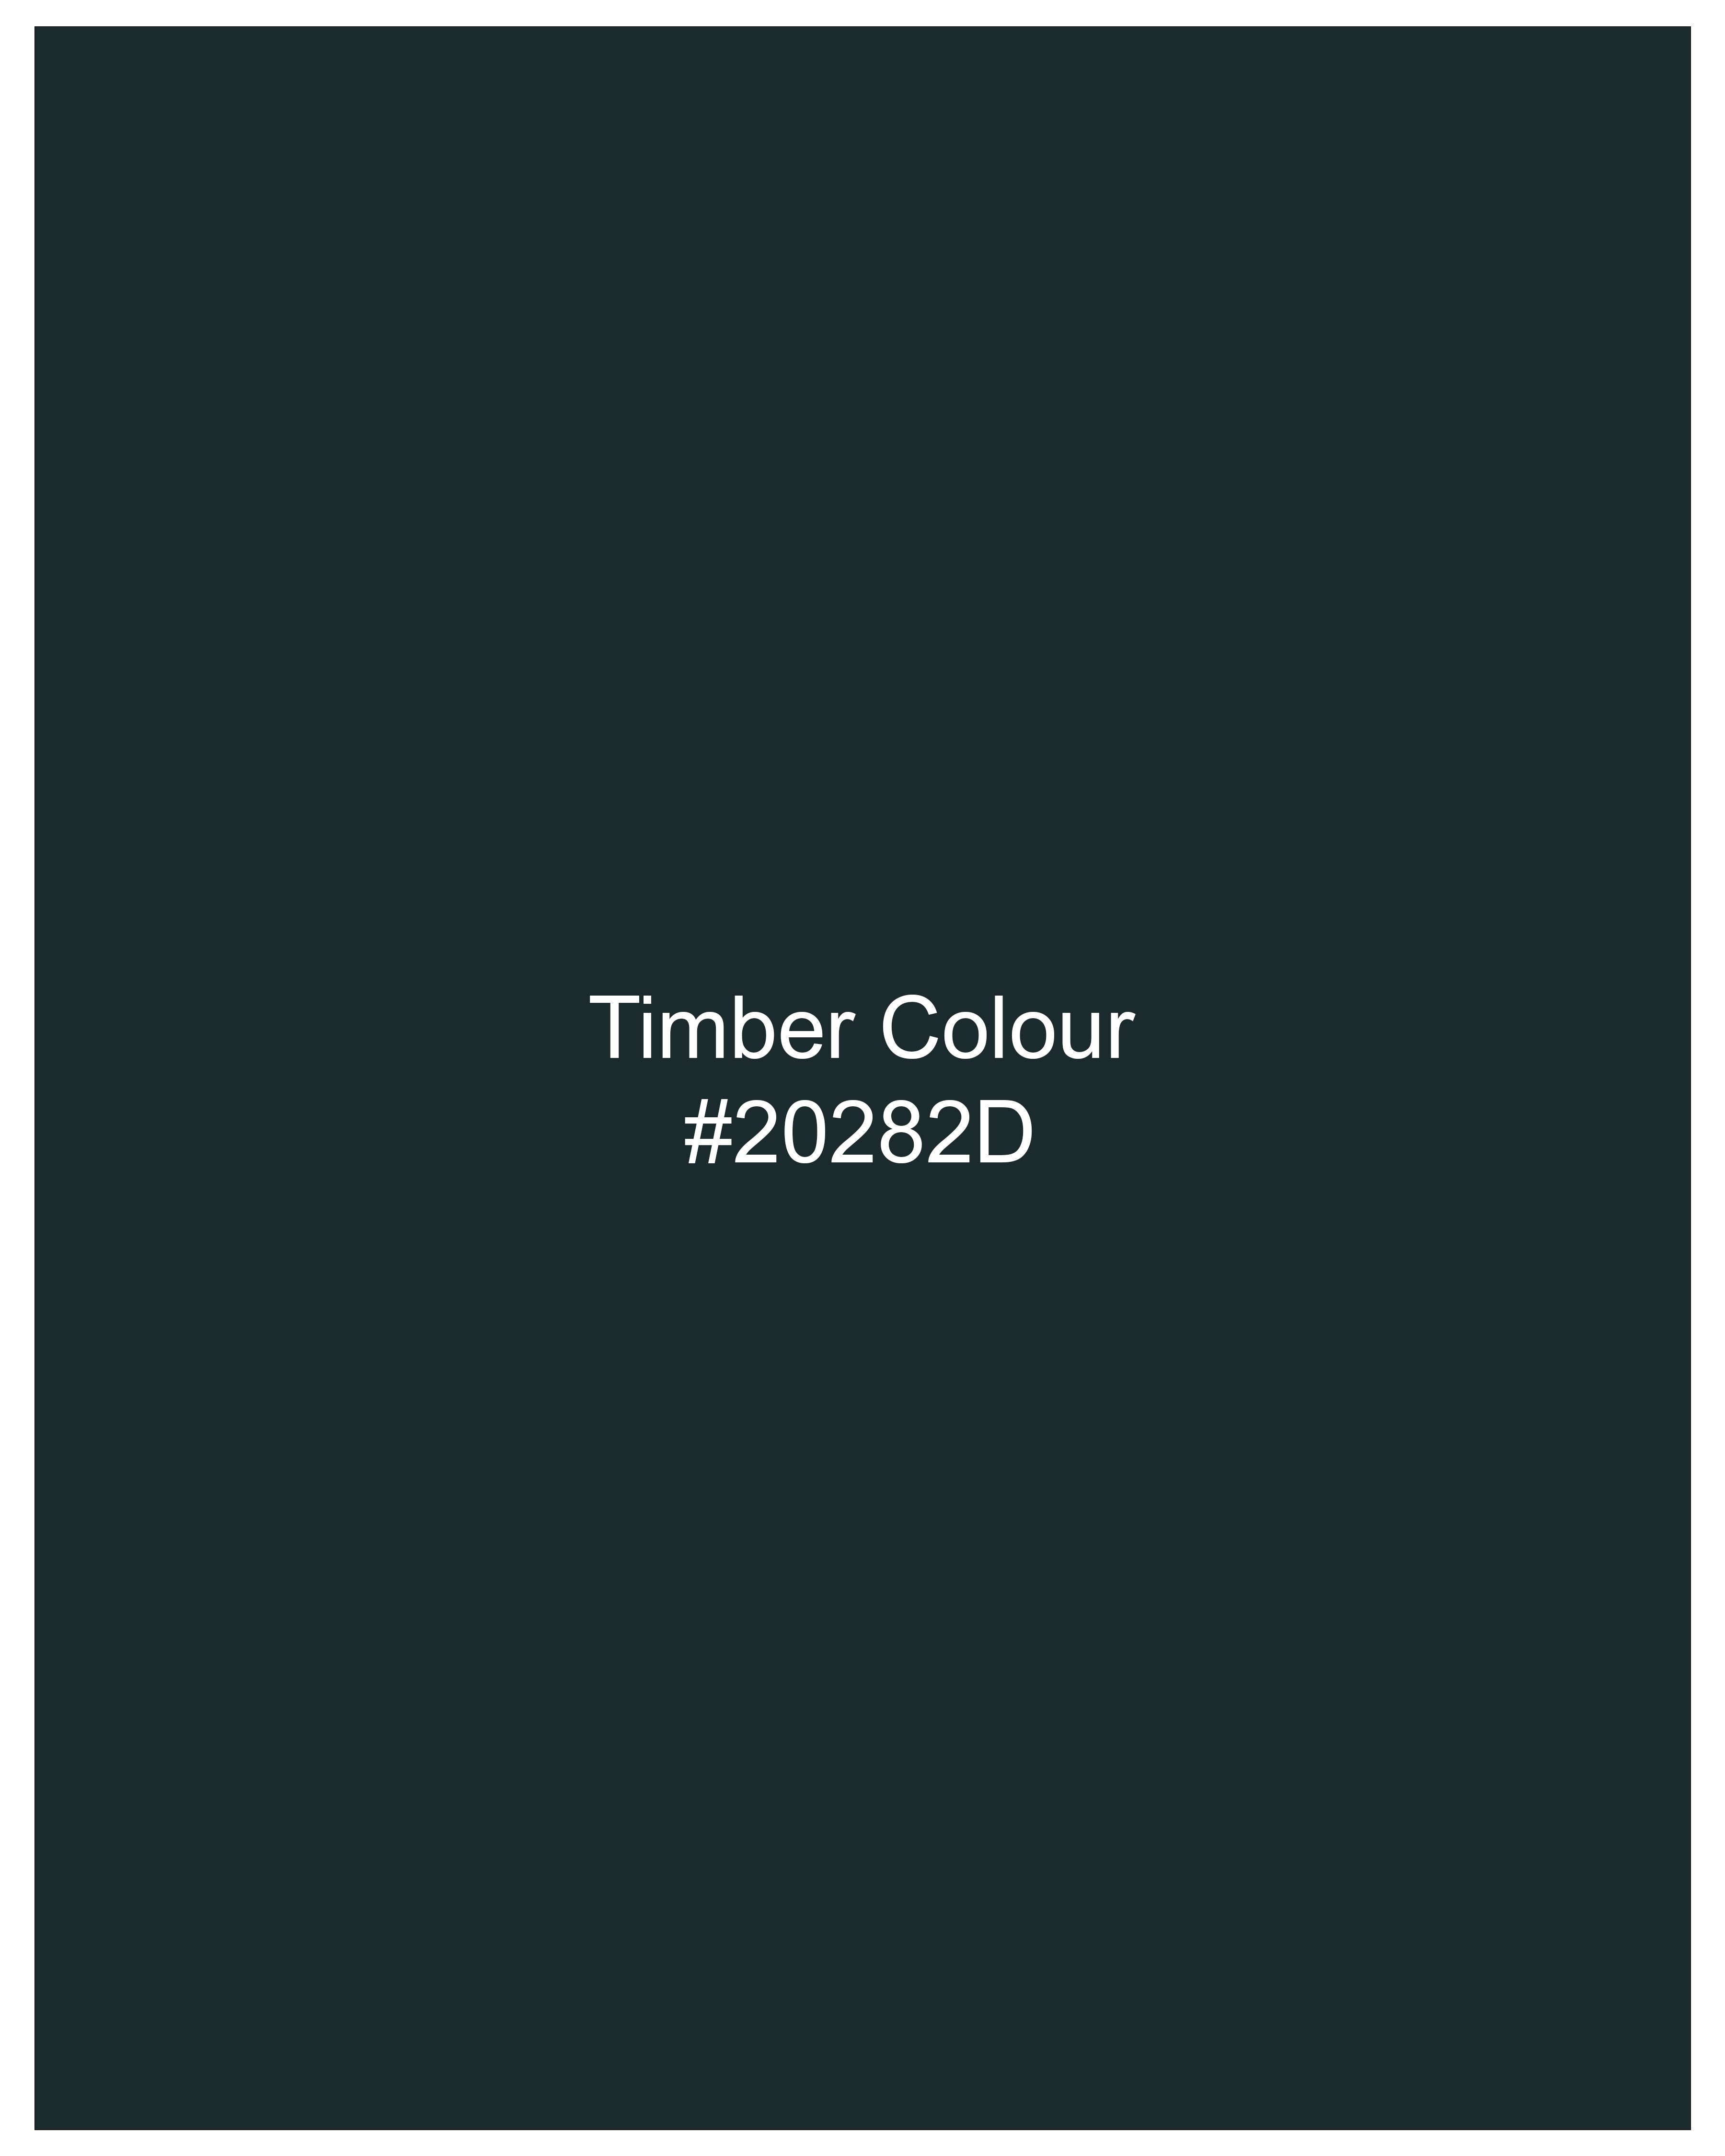 Timber Sea Blue Solid Stretchable Premium Cotton traveler Suit ST2637-SB-36,ST2637-SB-38,ST2637-SB-40,ST2637-SB-42,ST2637-SB-44,ST2637-SB-46,ST2637-SB-48,ST2637-SB-50,ST2637-SB-52,ST2637-SB-54,ST2637-SB-56,ST2637-SB-58,ST2637-SB-60